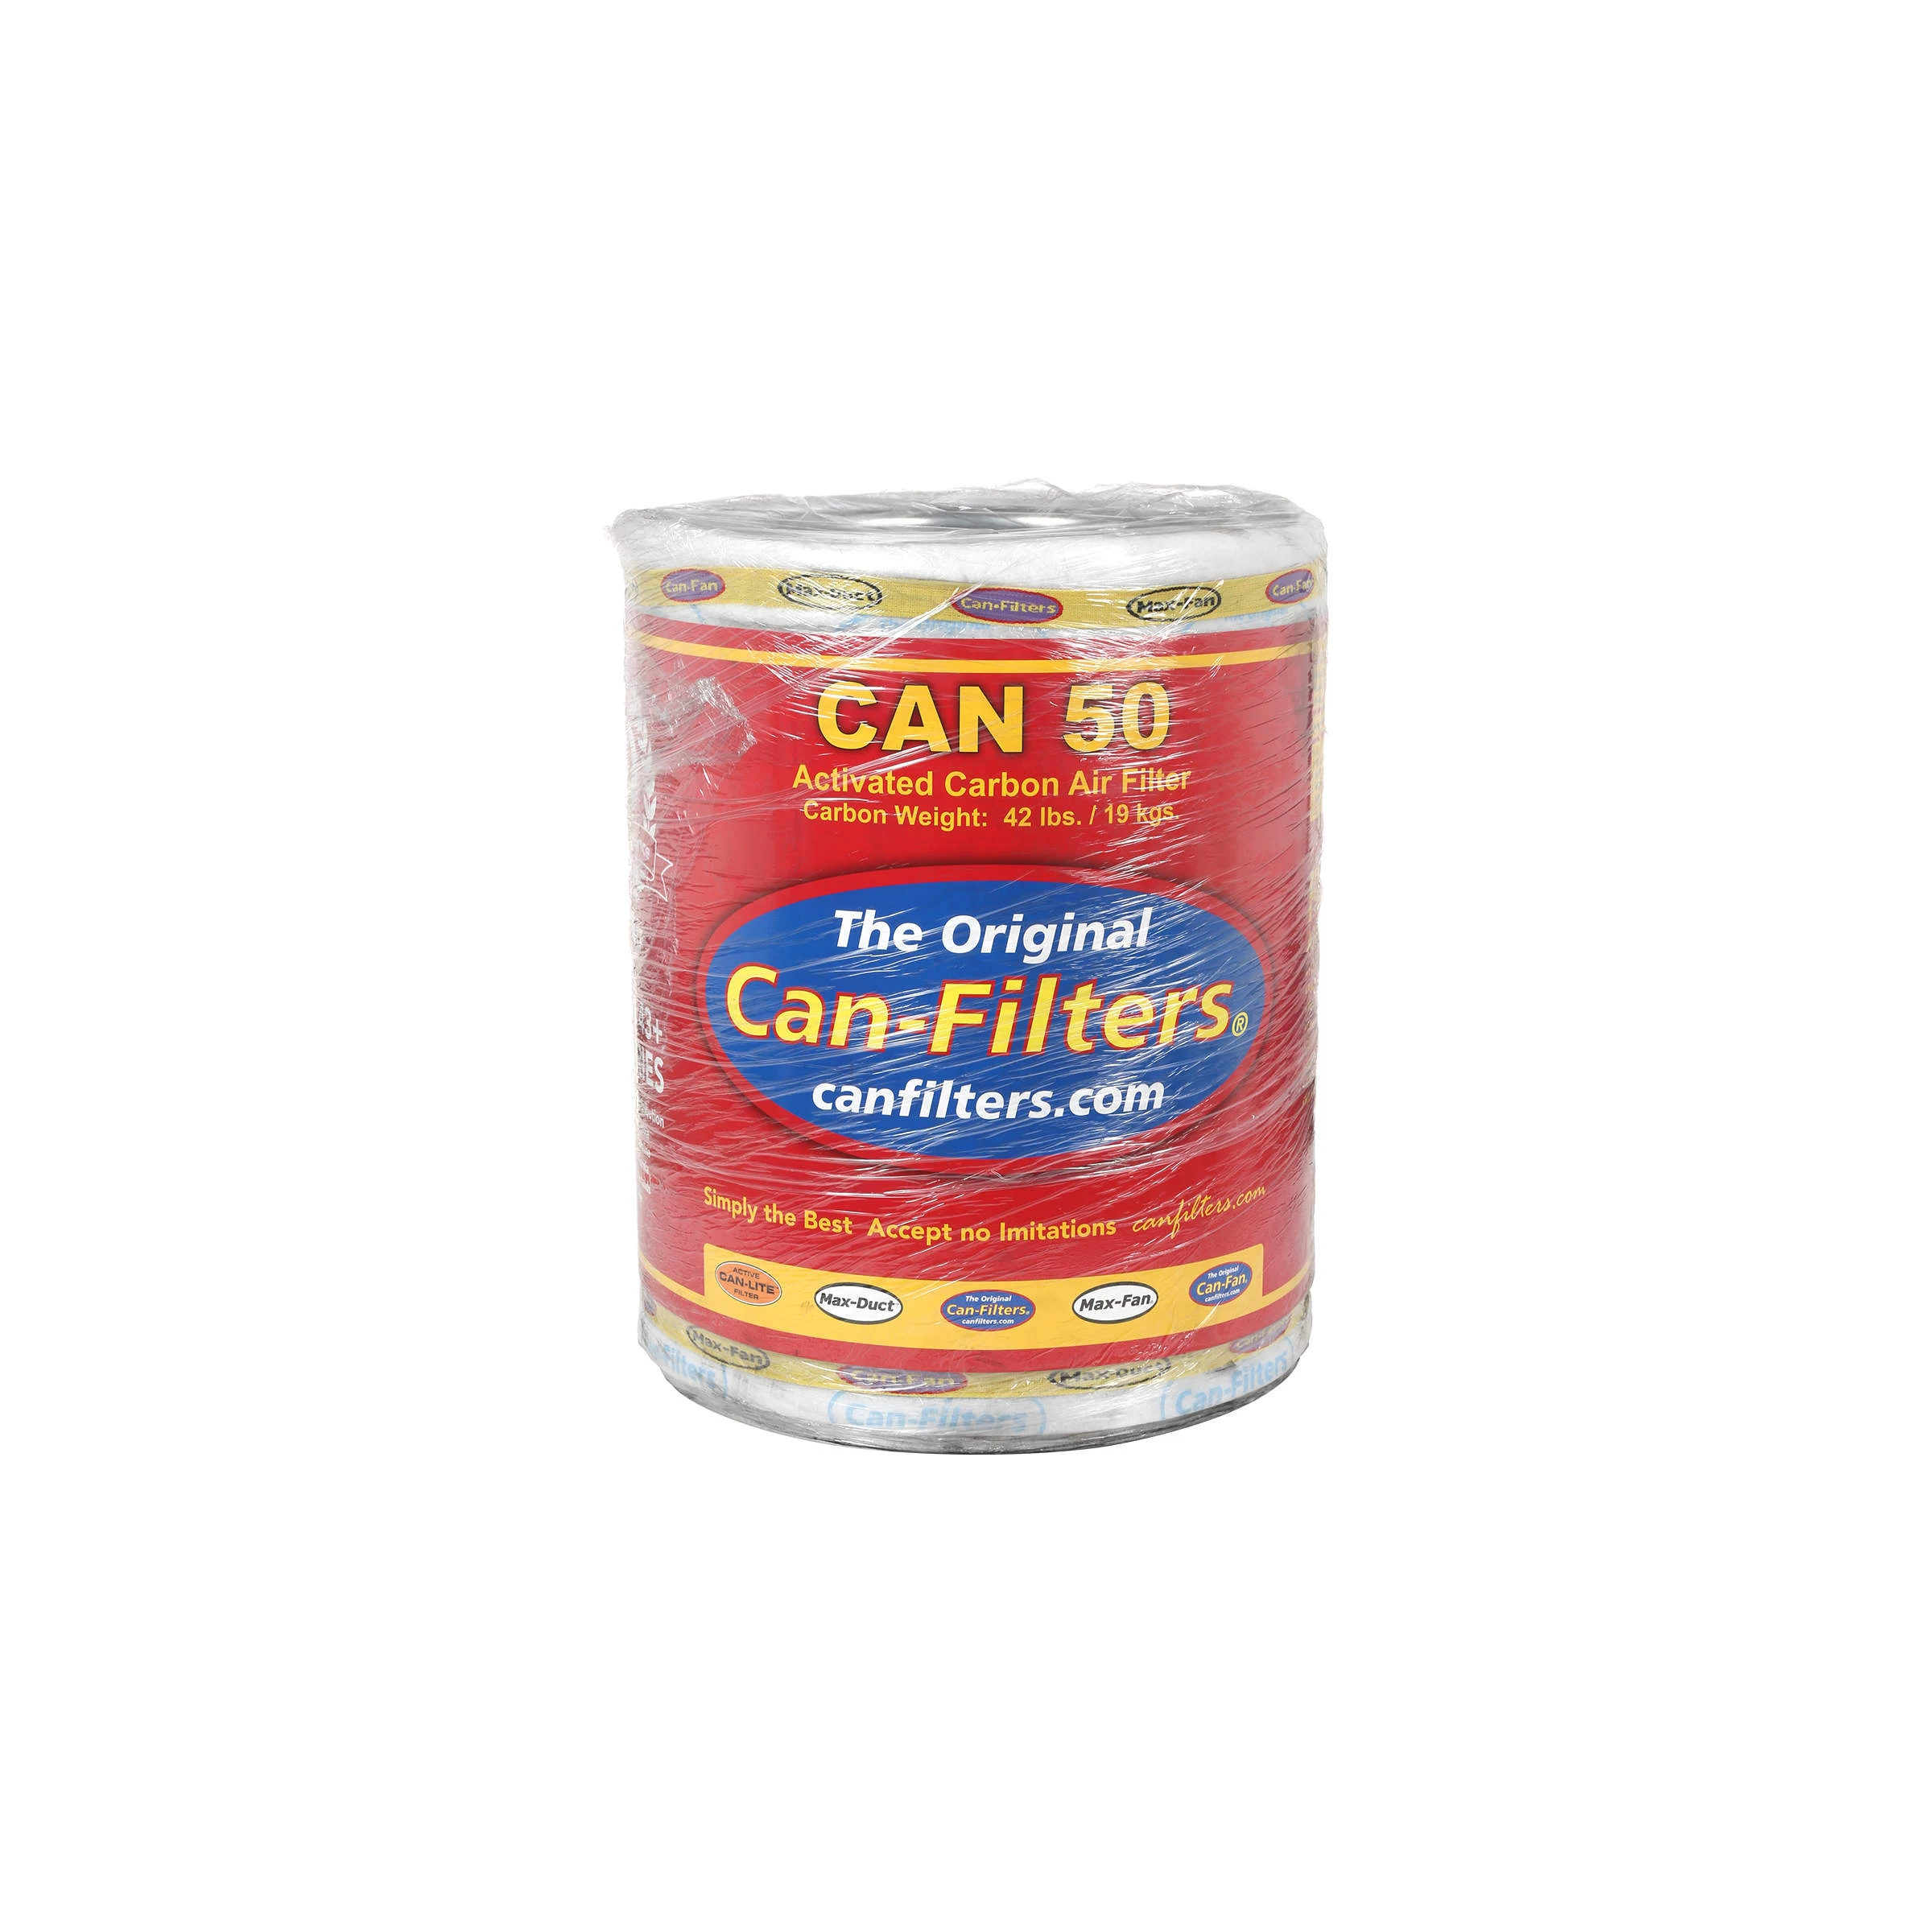 CAN-FILTER 50 W/ OUT FLANGE 420 CFM